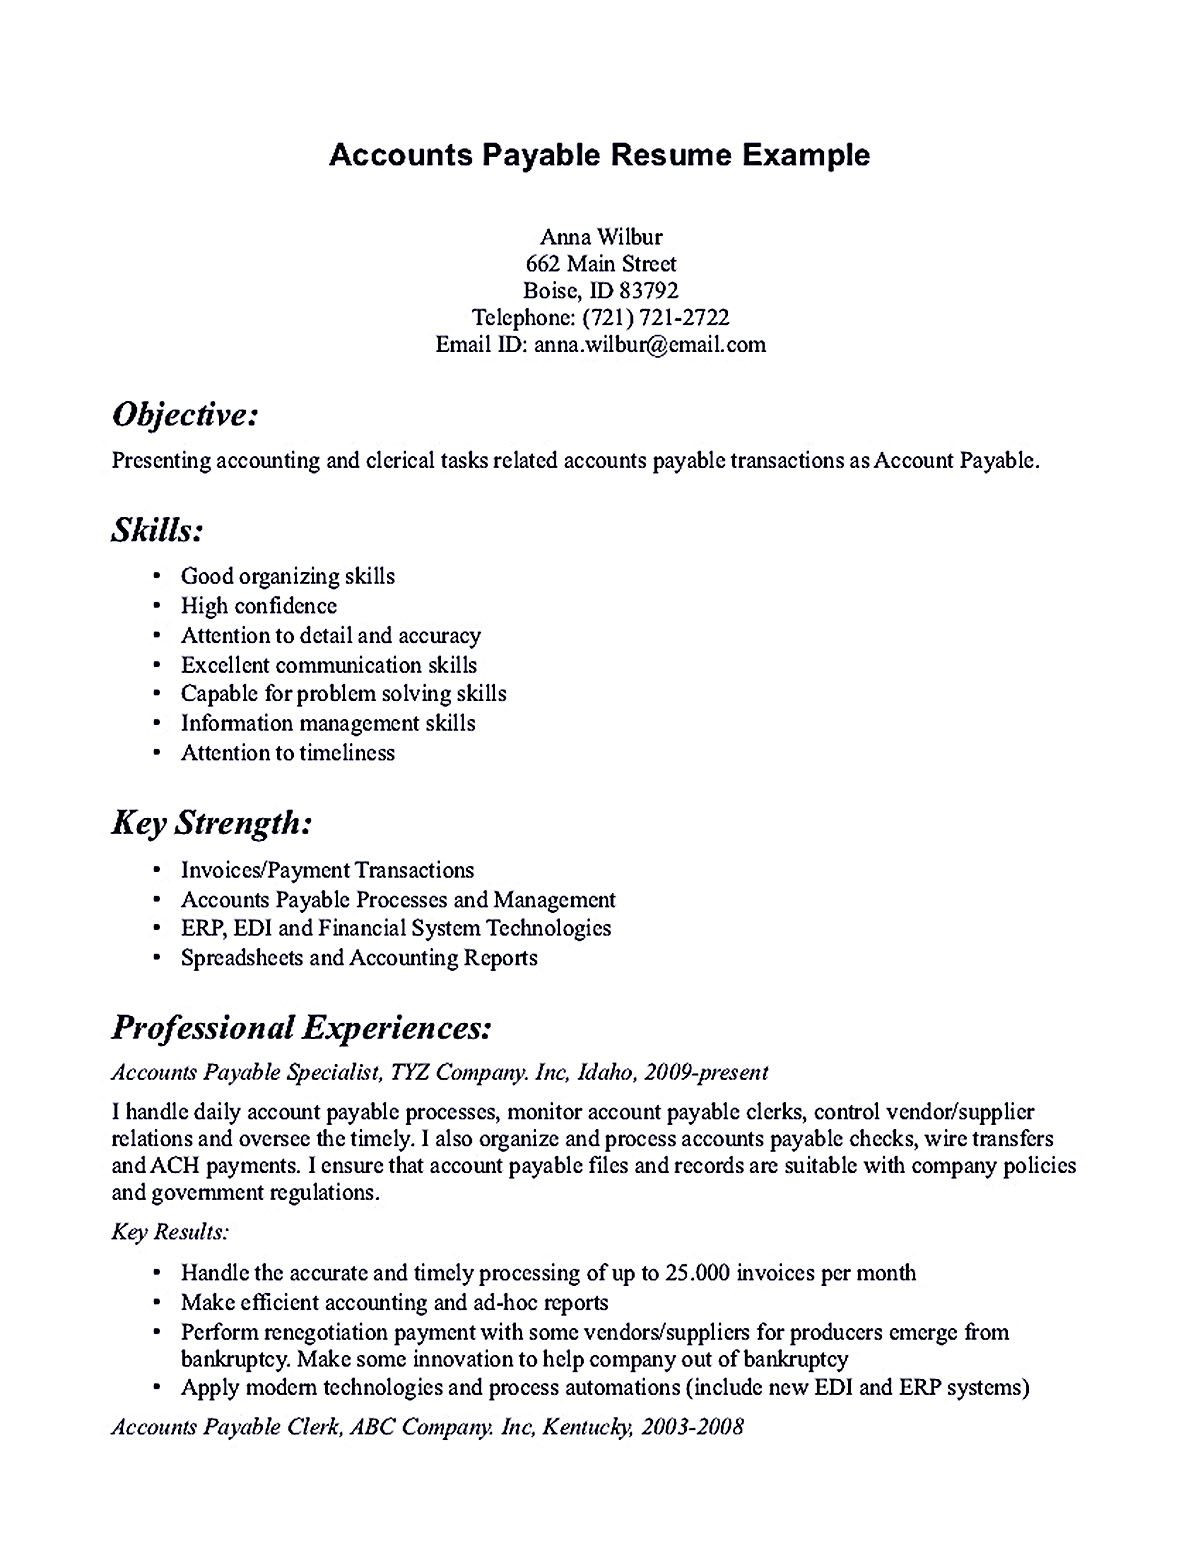 Interpersonal Skills On A Resume Sample Account Payable Resume Display Your Skills as Account Payable …